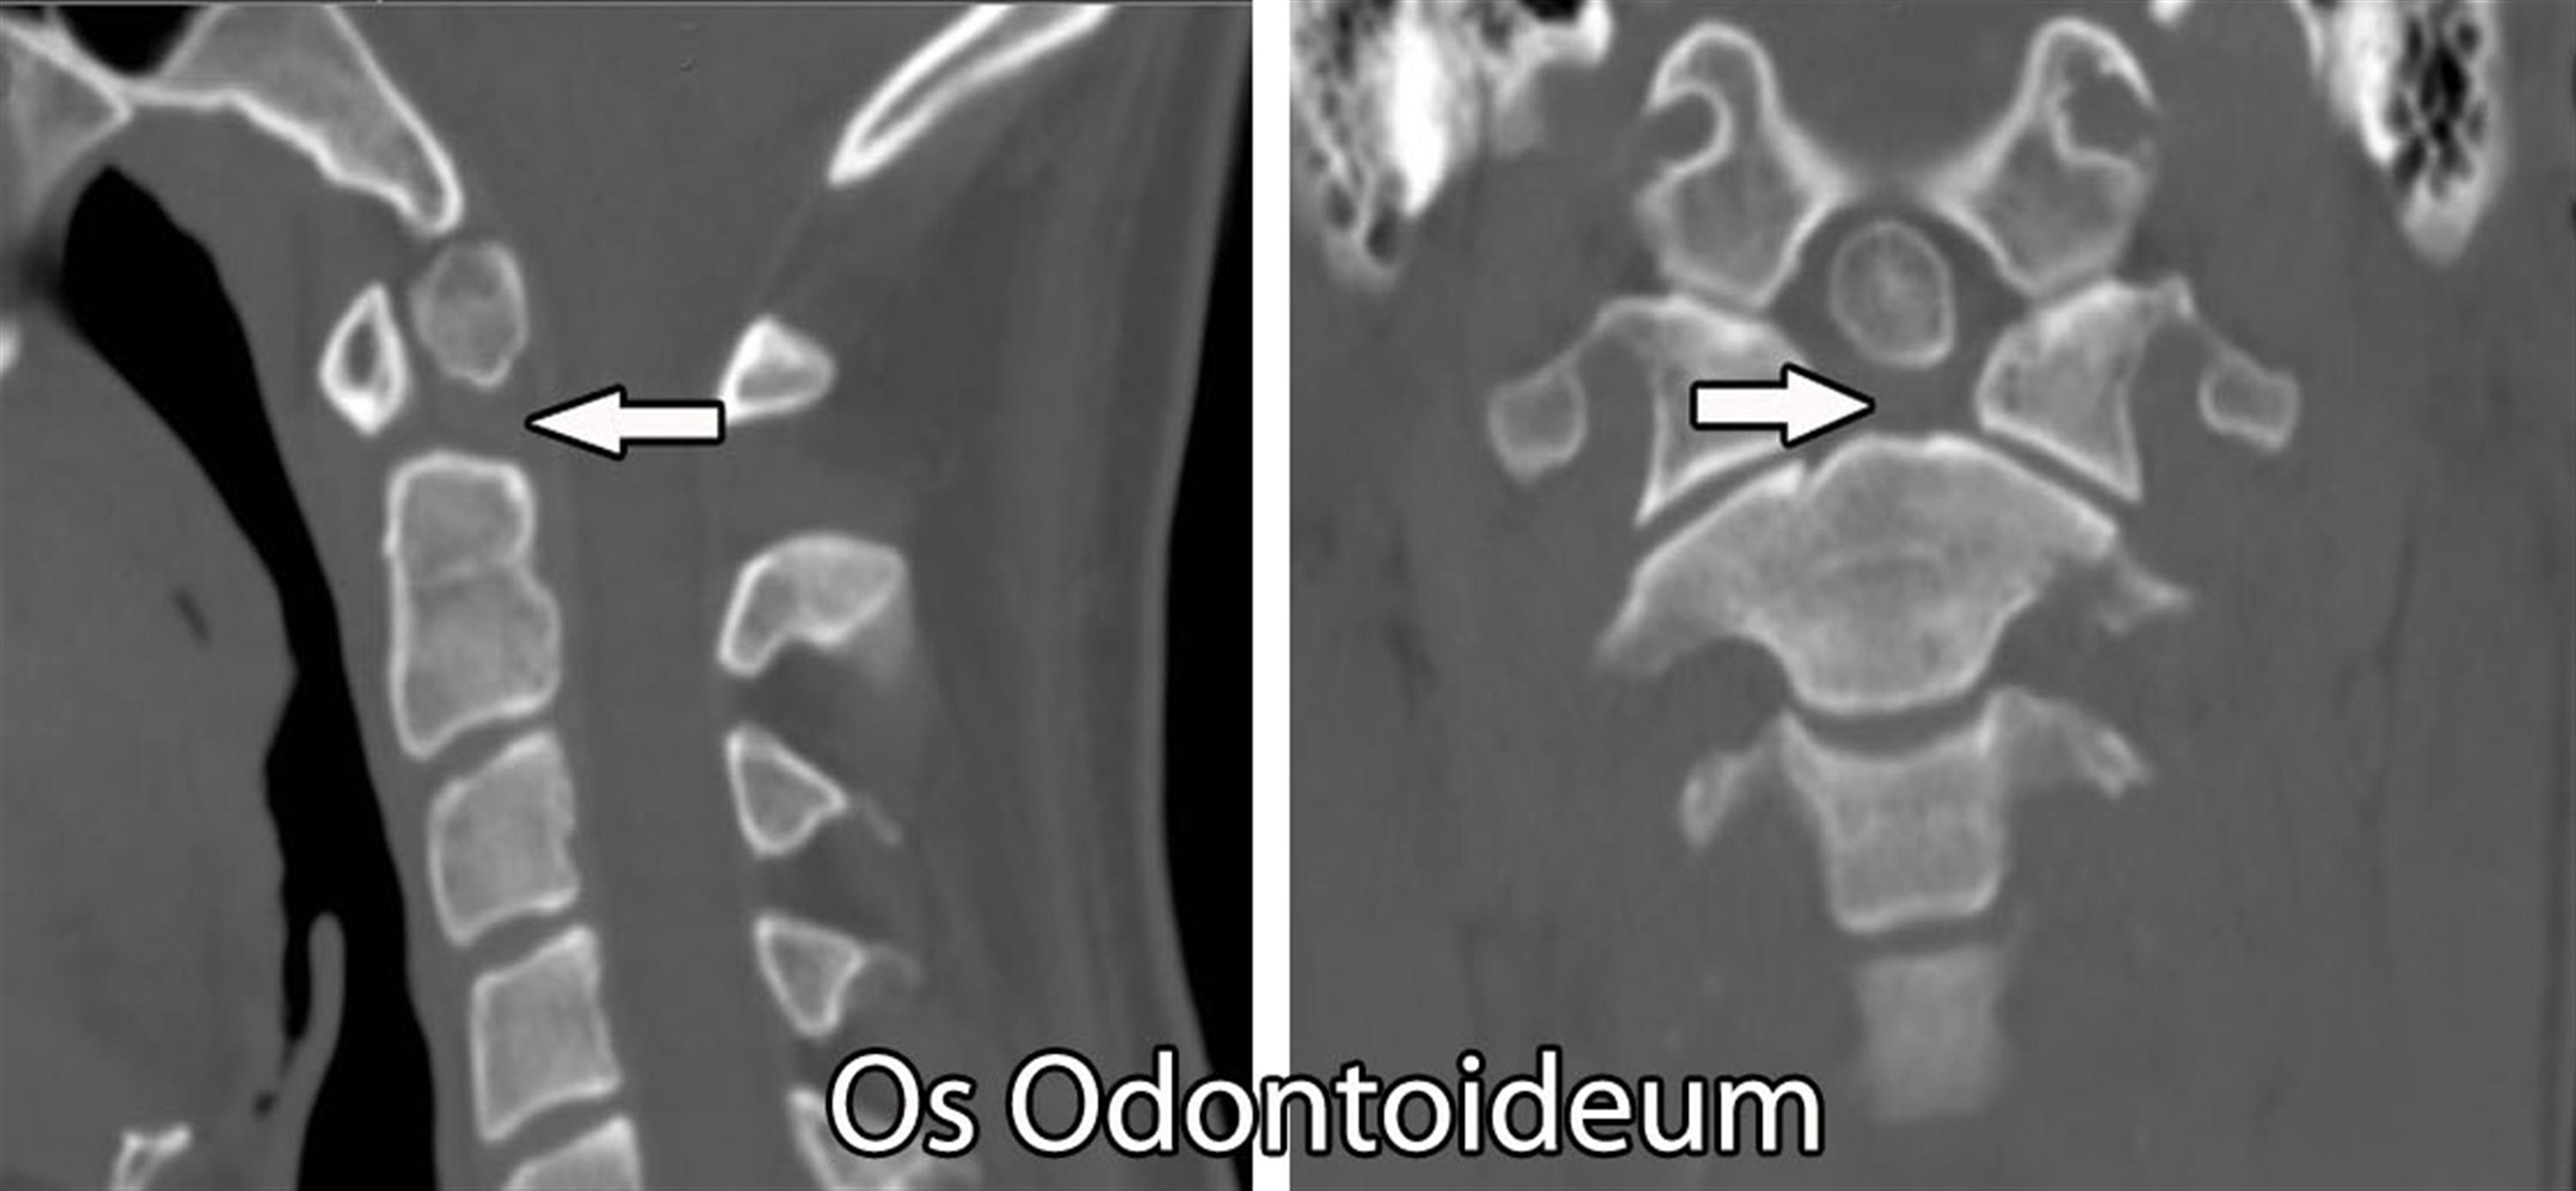 Surgical Management of an Elderly Patient with Free Floating Os Odontoideum